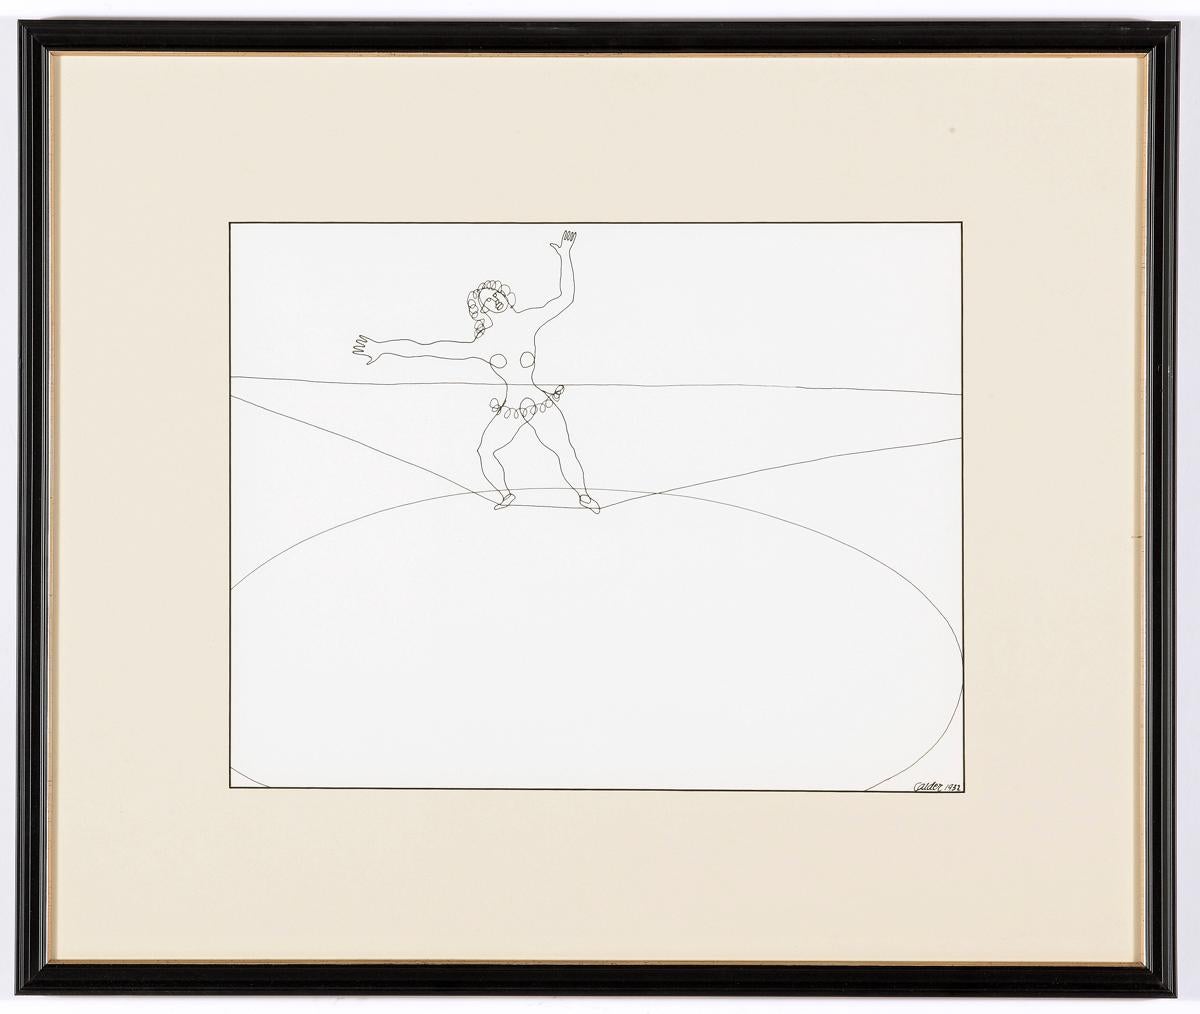 Calder Circus, complete Set of 16 lithographs after the original drawings - Beige Animal Print by (after) Alexander Calder